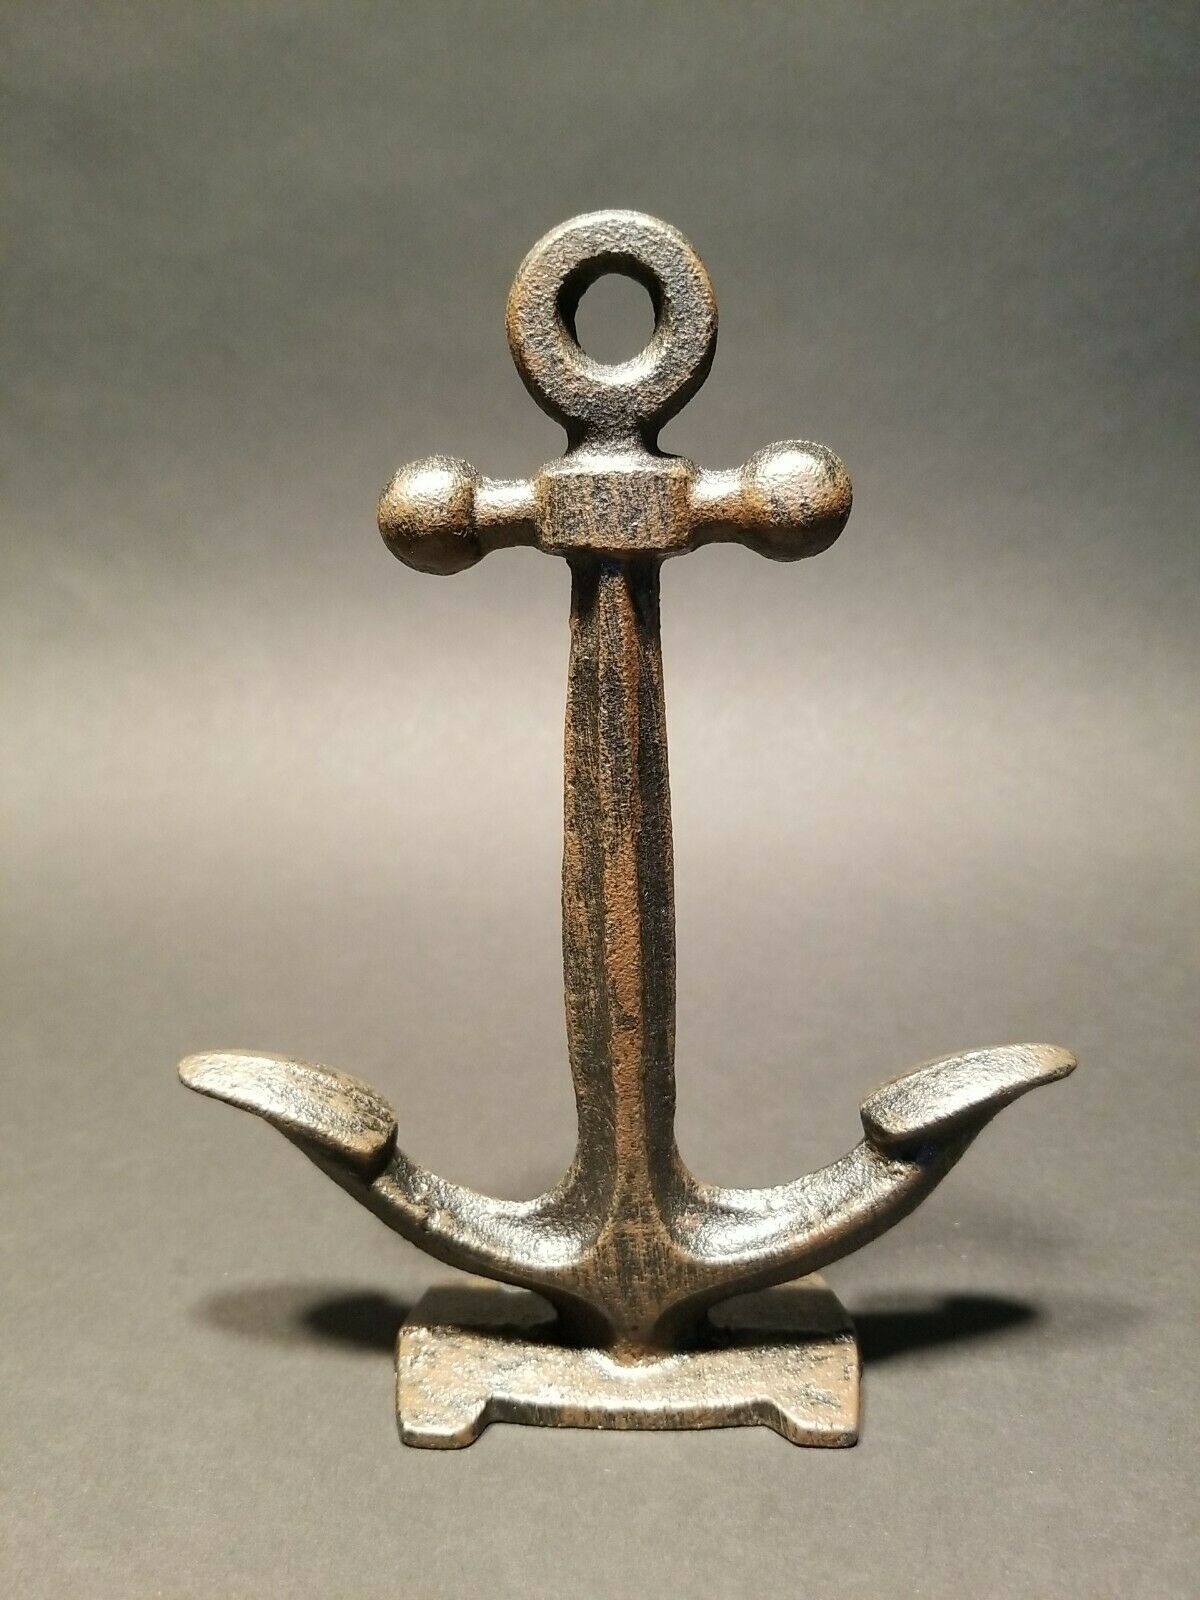 Vintage Antique Style Cast Iron Ships Boat Anchor Desk Paperweight